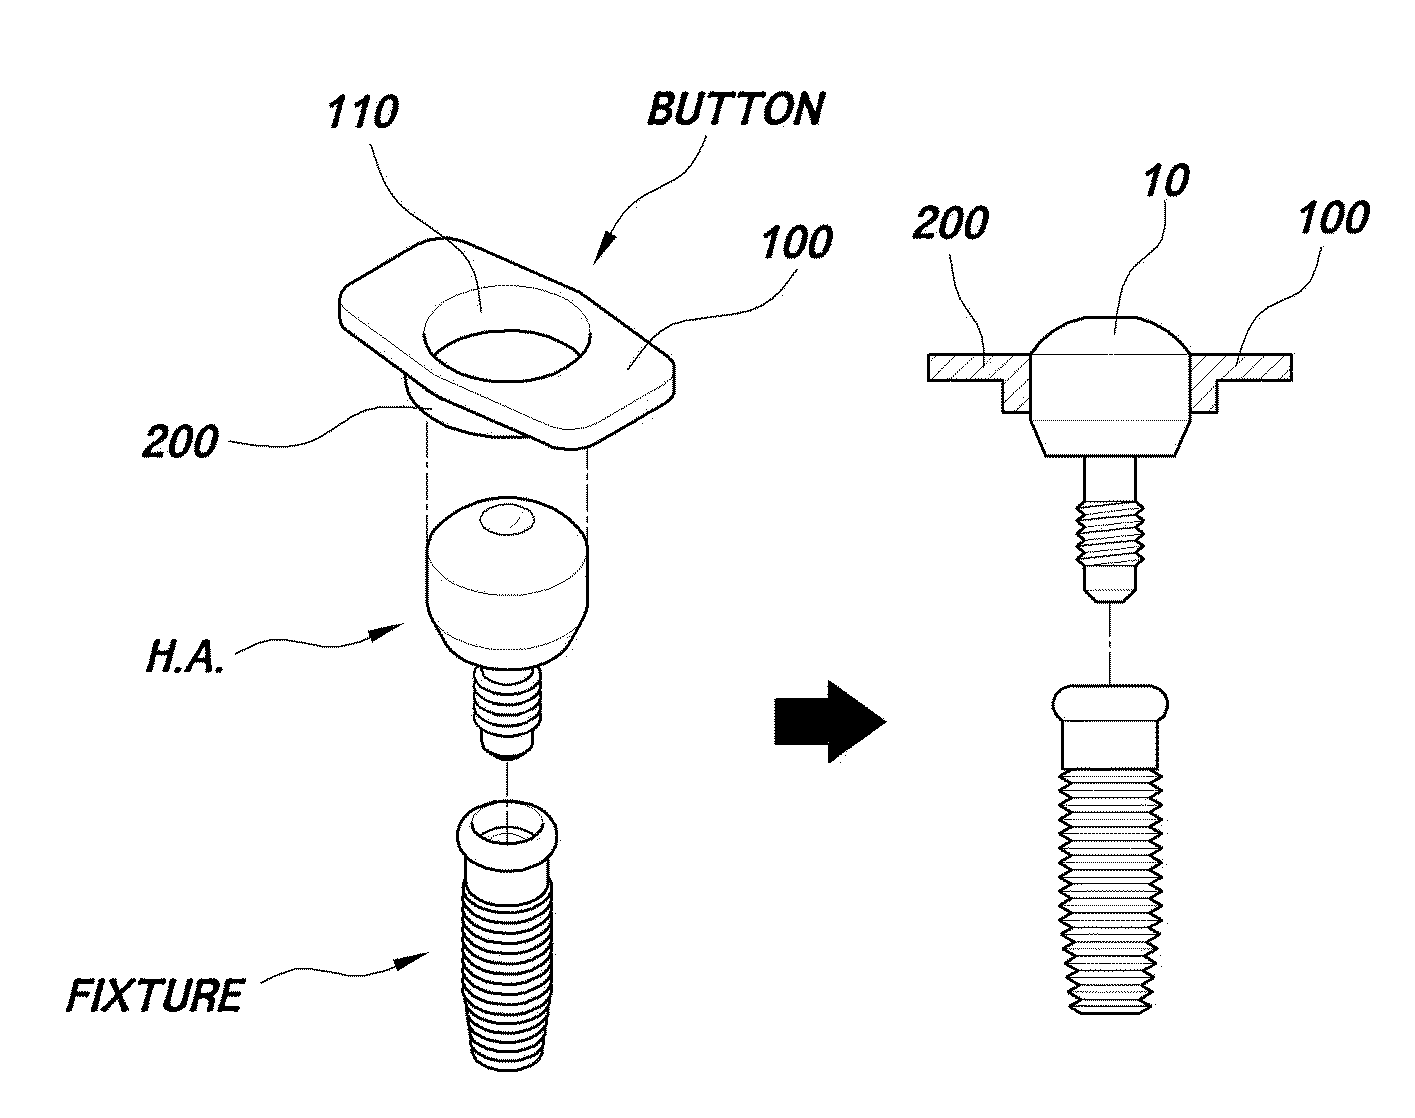 Button for implnat healing abutment and implant healing abutment having pressing part